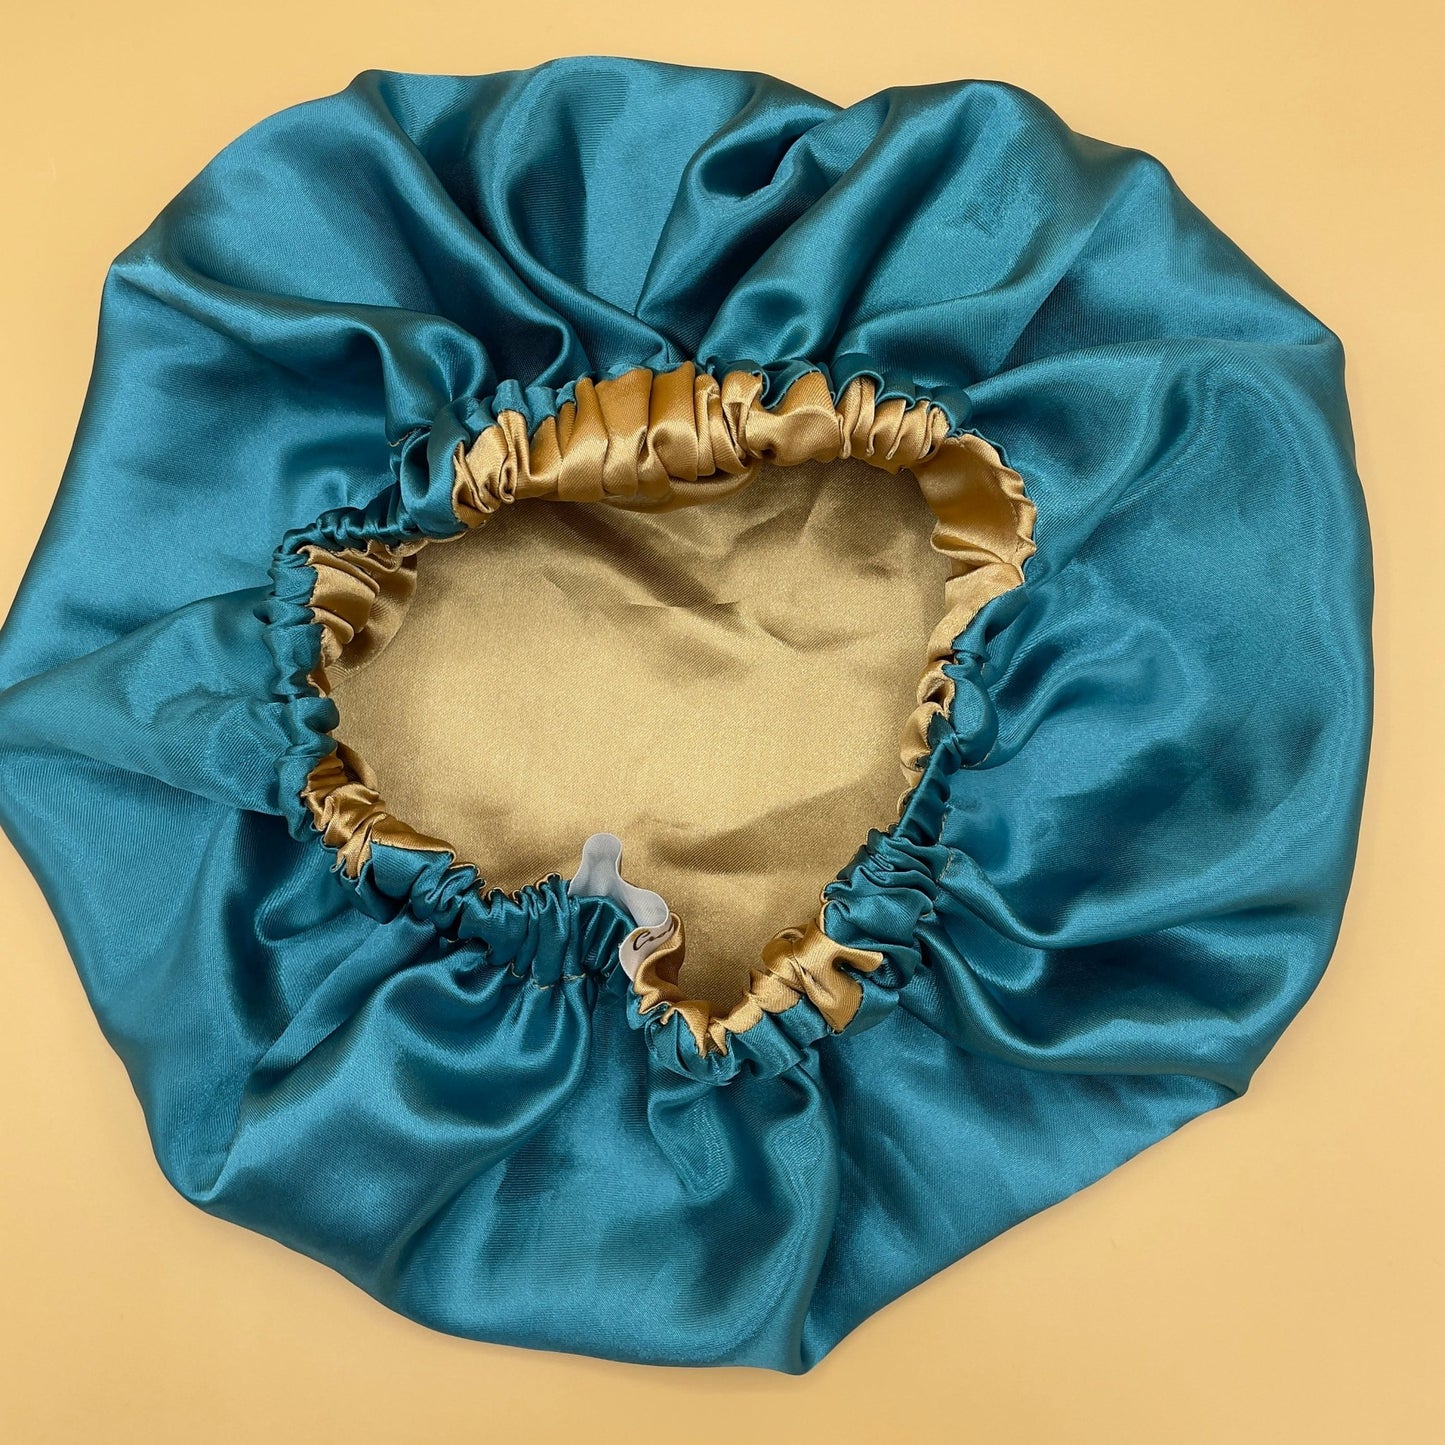 Golden Kiwi Satin Bonnets - Crowned by RoyaltyKids11